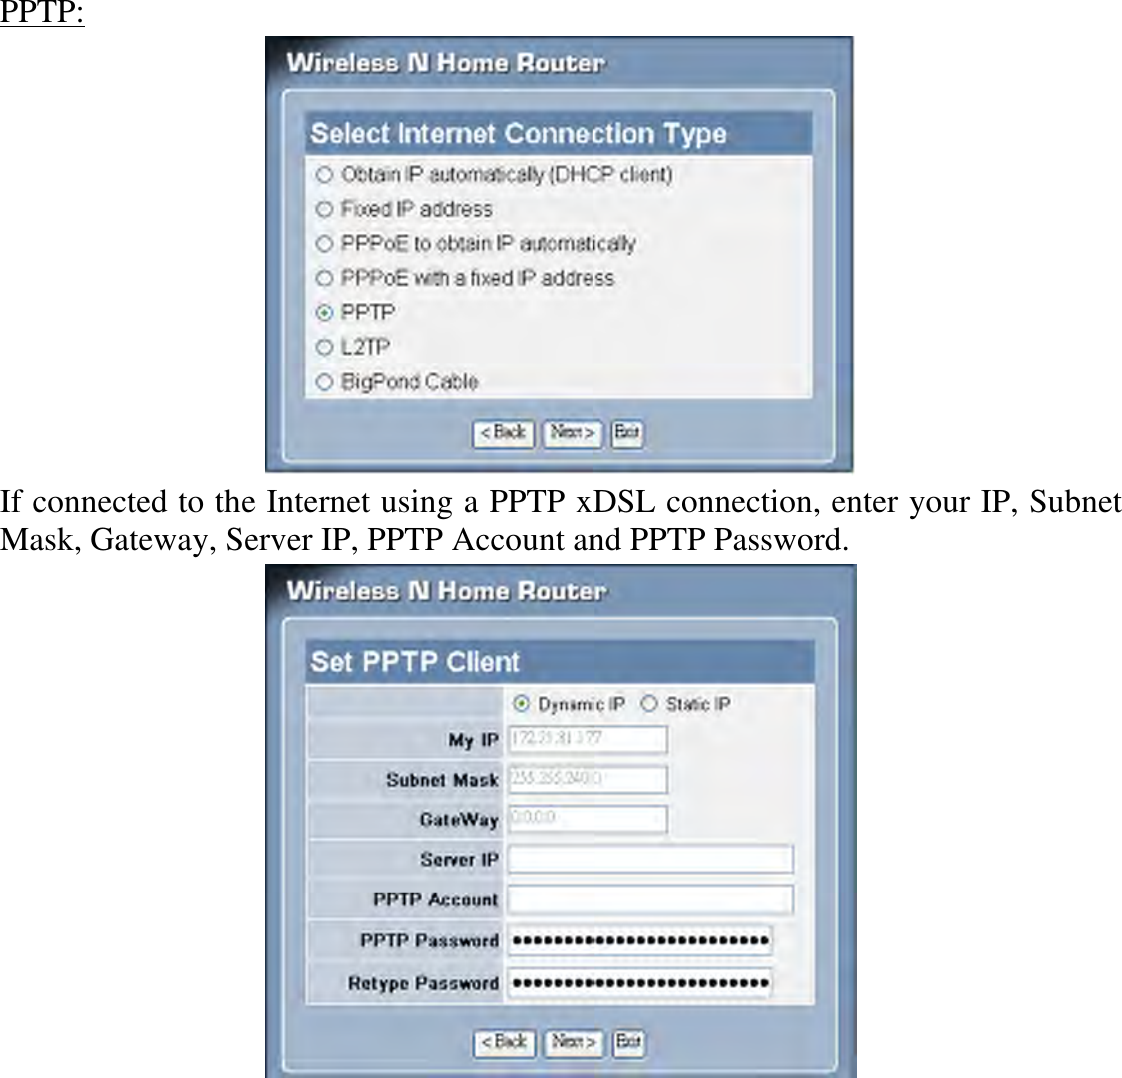 PPTP:  If connected to the Internet using a PPTP xDSL connection, enter your IP, Subnet Mask, Gateway, Server IP, PPTP Account and PPTP Password.    